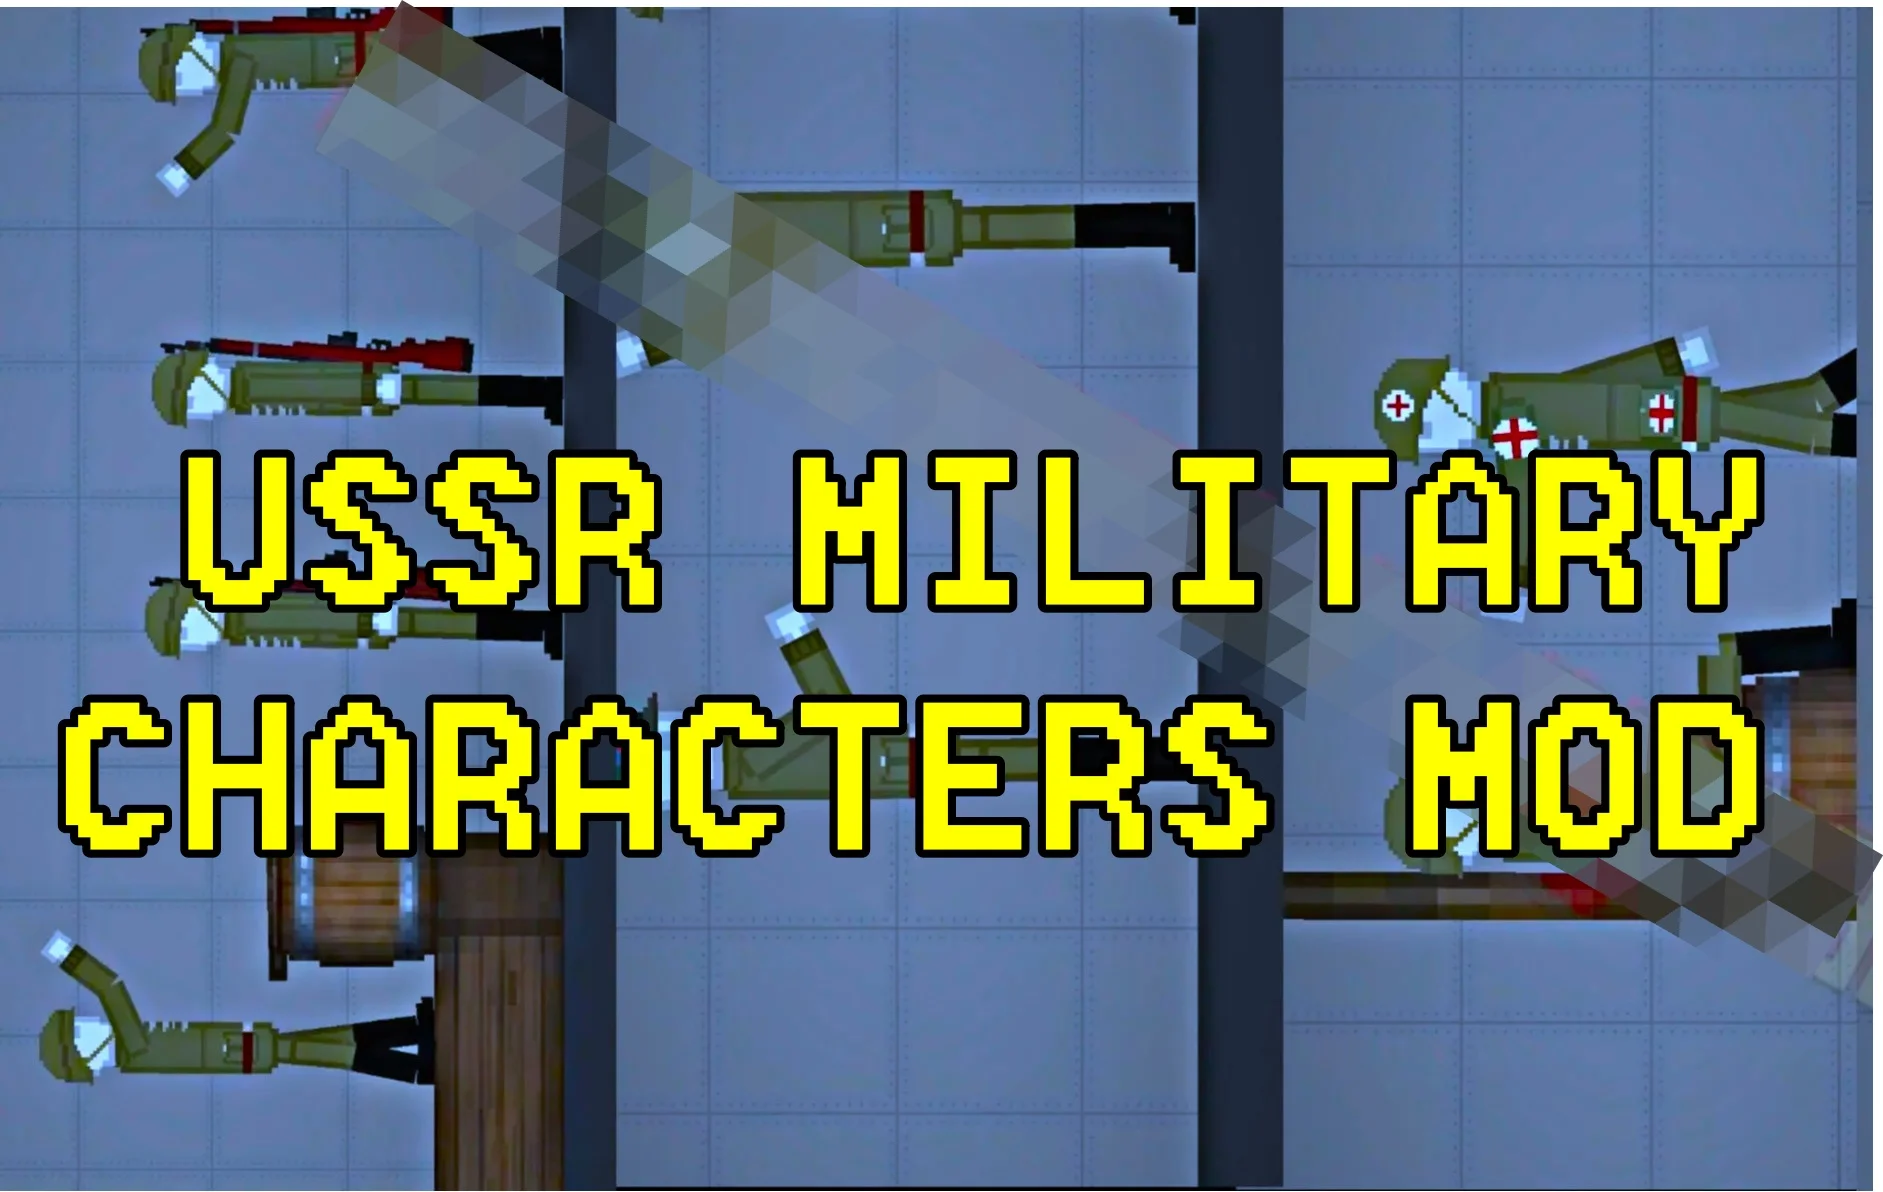 Read more about the article USSR MILITARY CHARACTERS MOD SKINS PACKAGE